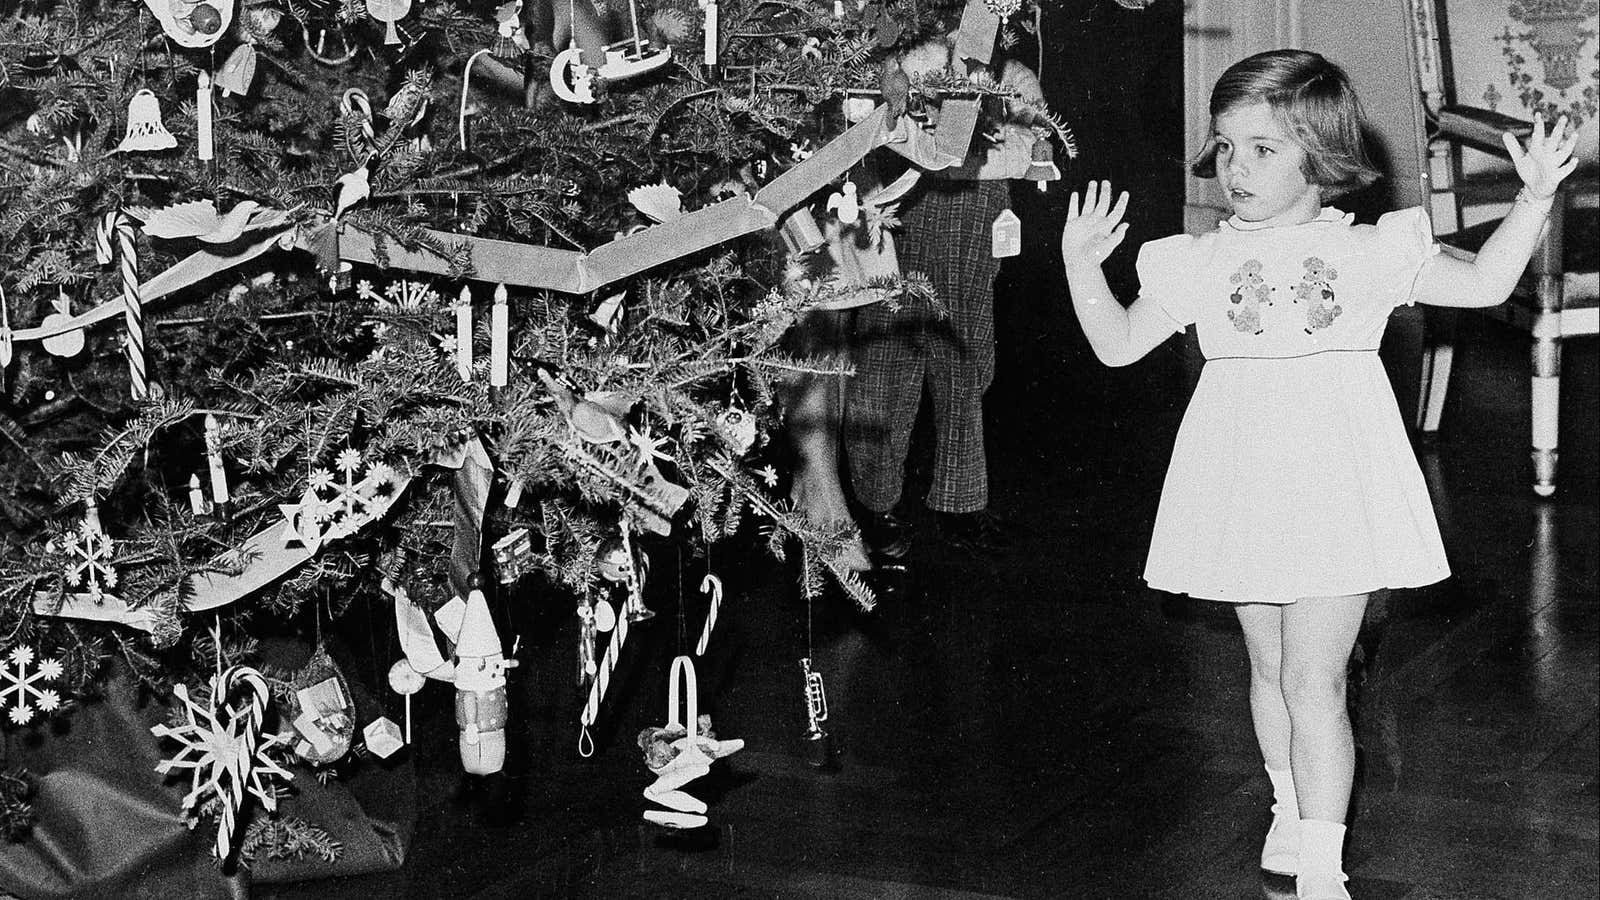 Caroline Kennedy has the proper reaction to the White House’s original “Nutcracker”-themed tree in 1961.